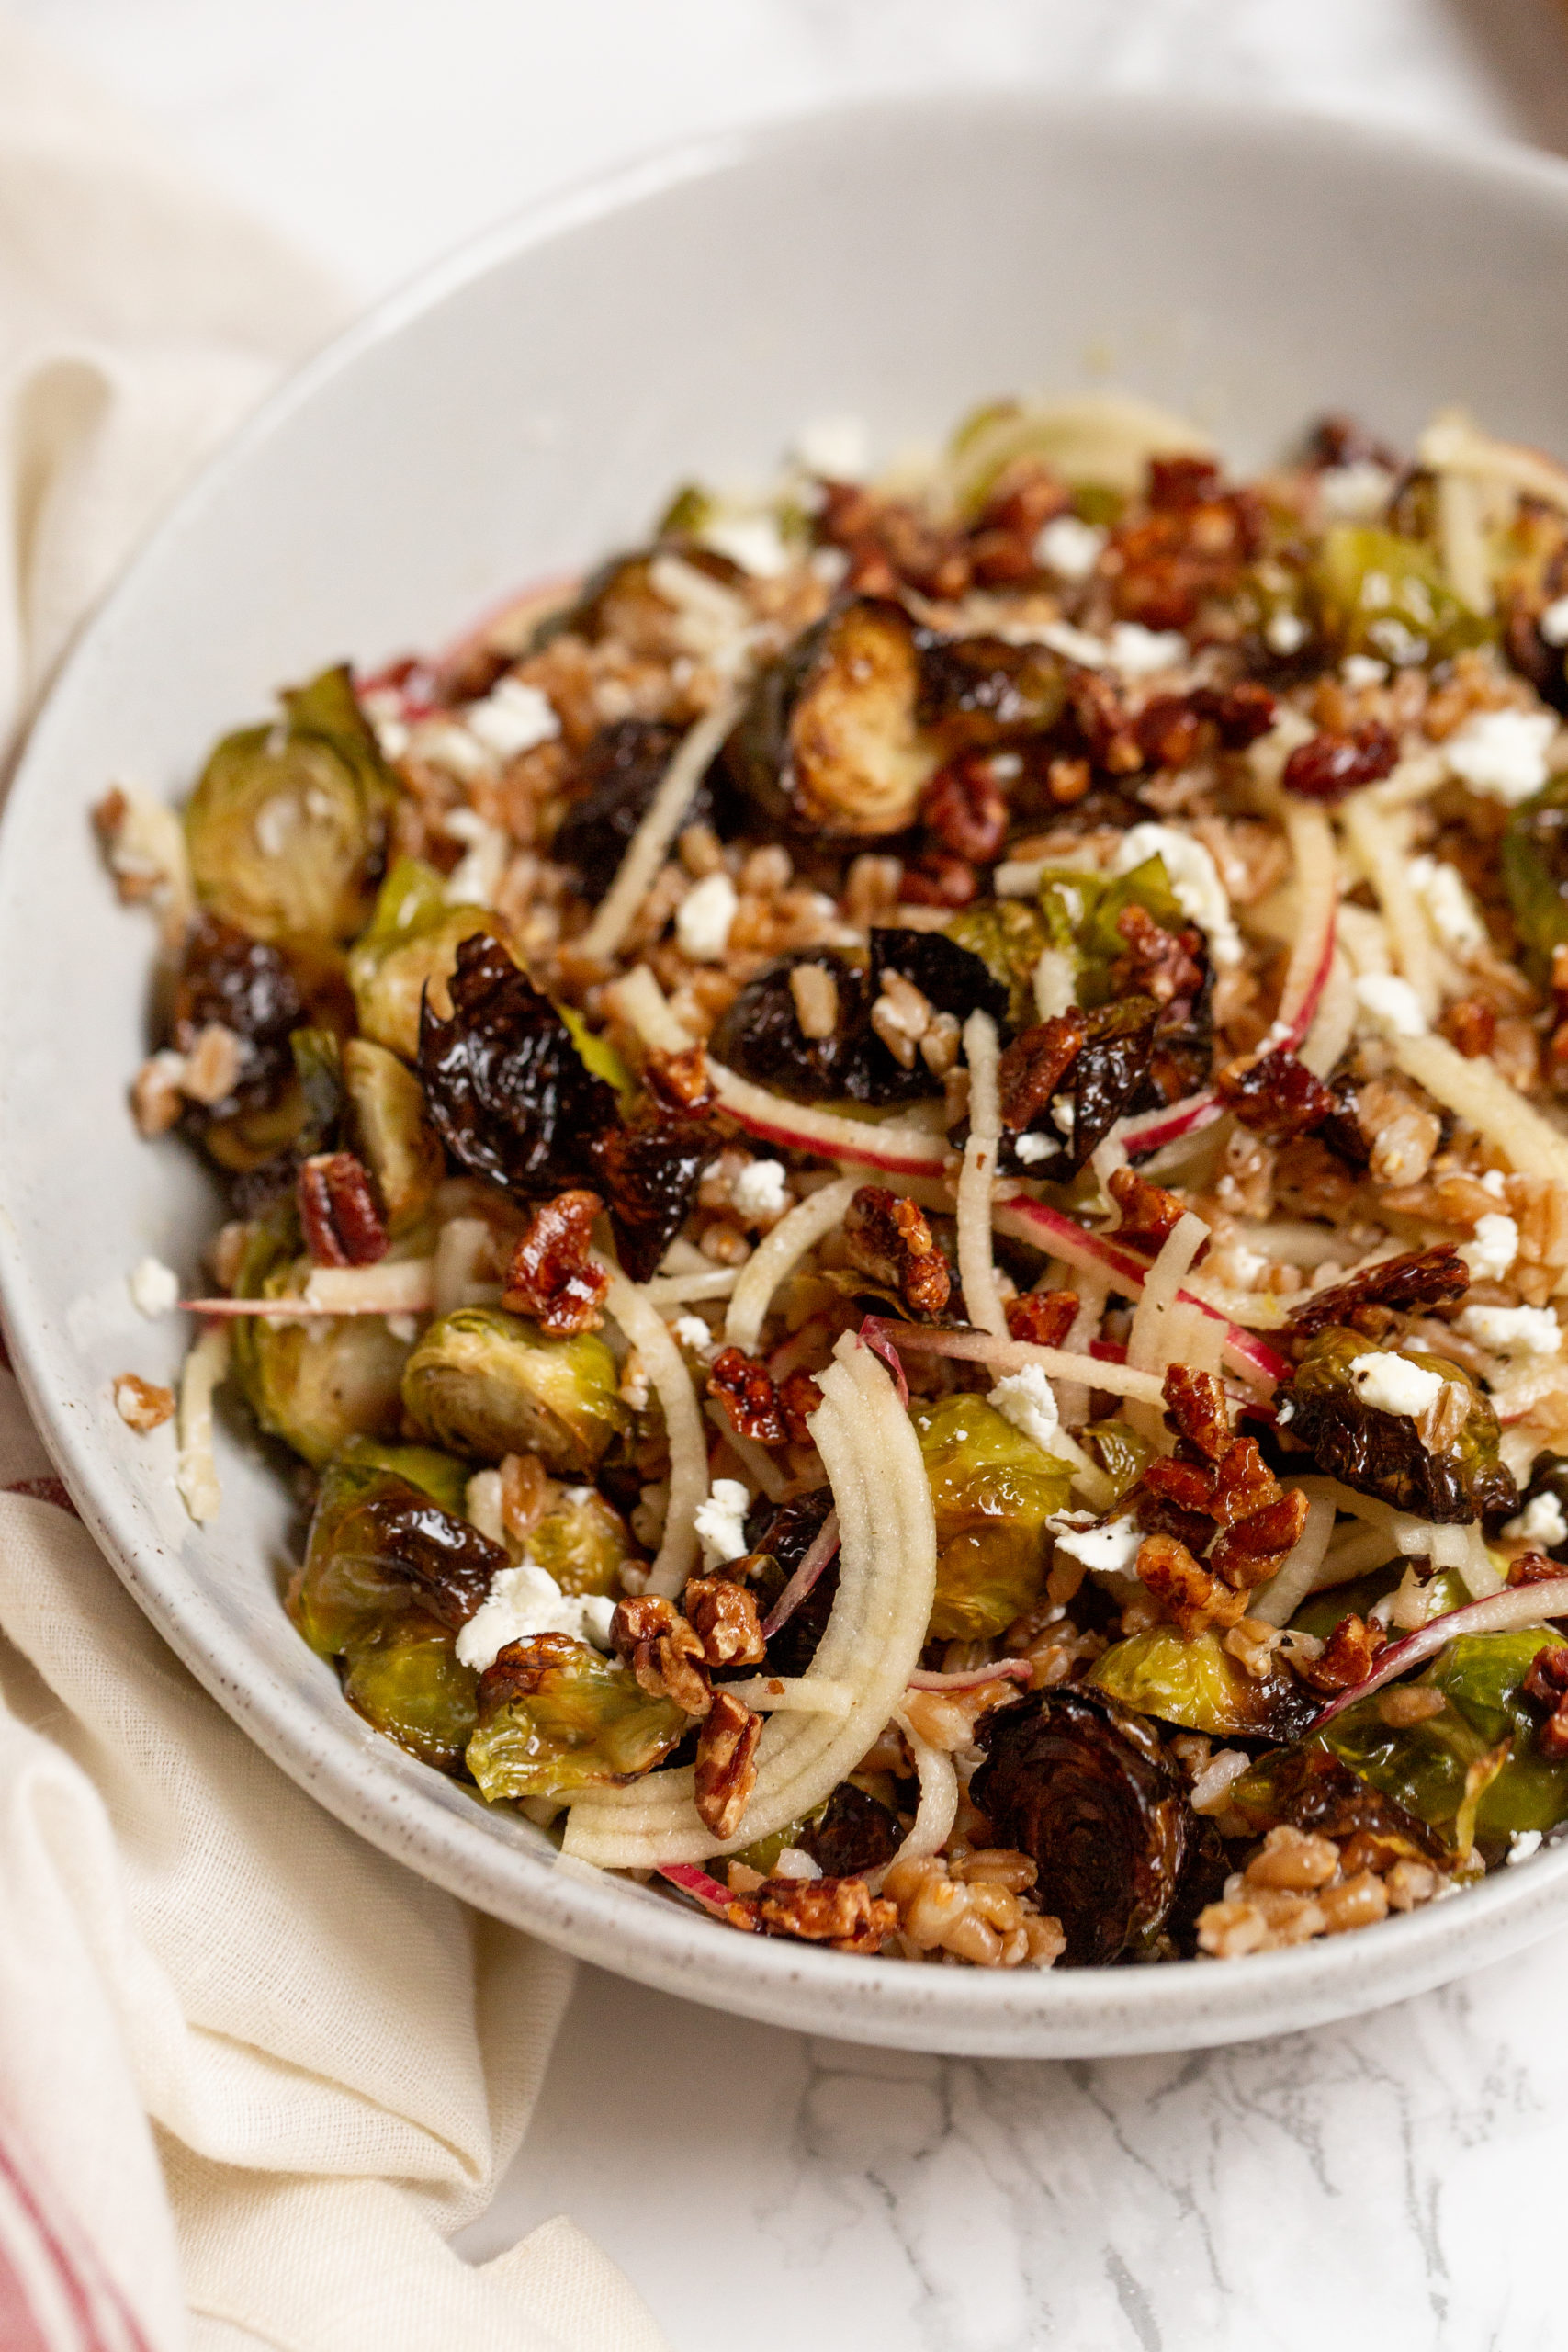 Apple and Farro Salad with Roasted Brussels Sprouts